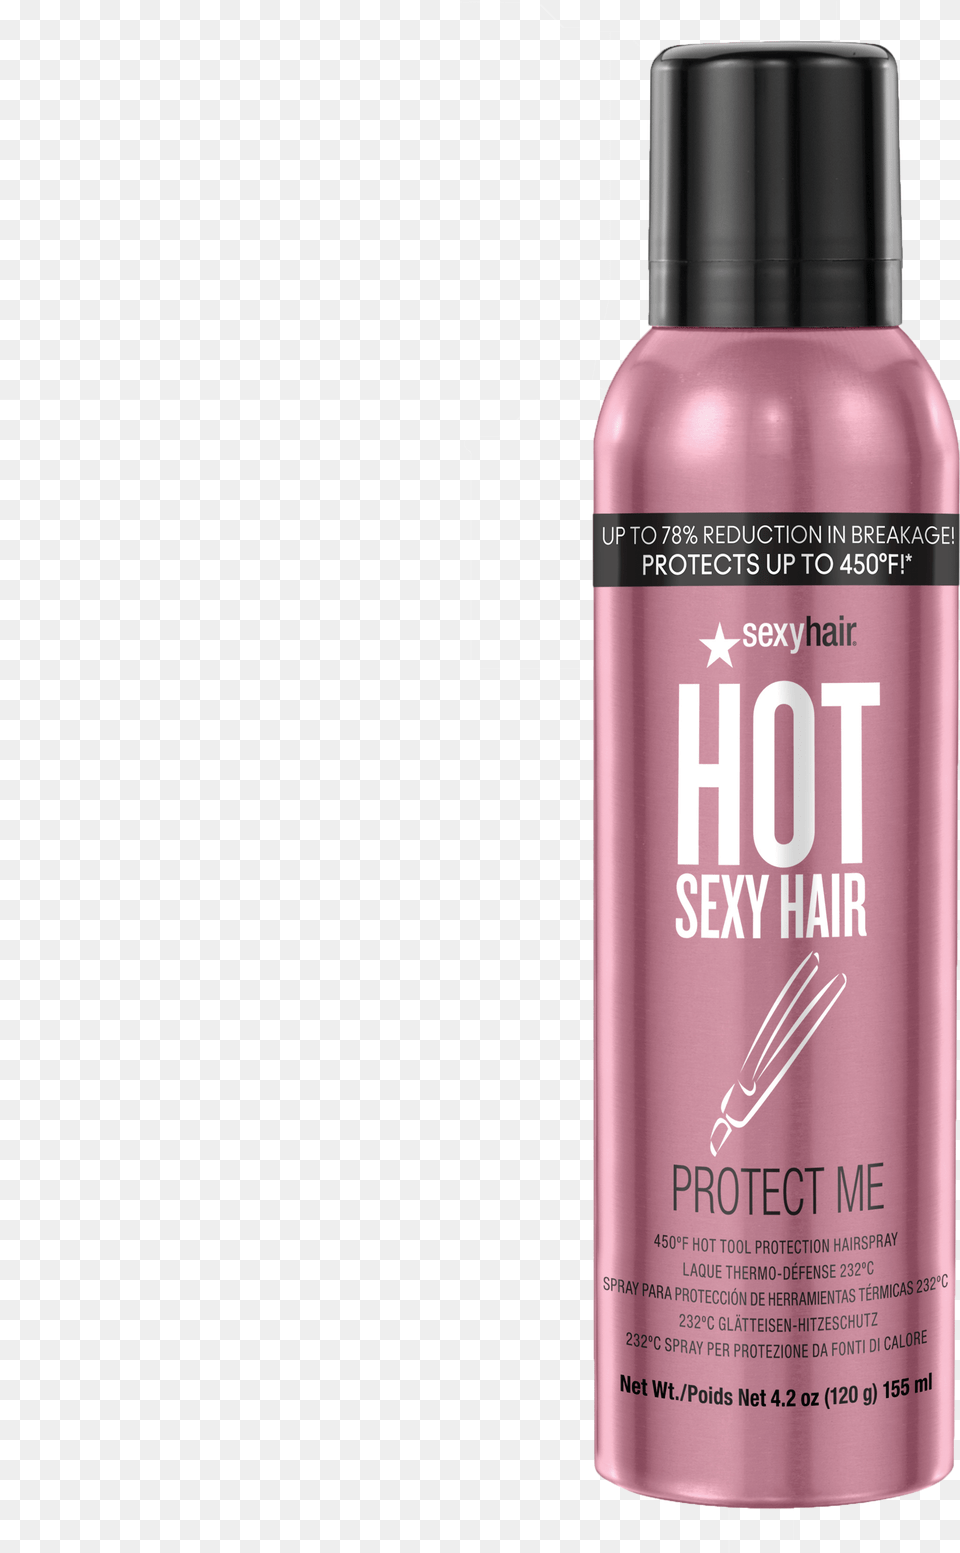 Sexy Hair Hot Sexy Hair Protect Me Hot Sexy Hair Protect Me, Cosmetics, Bottle, Perfume, Tin Png Image